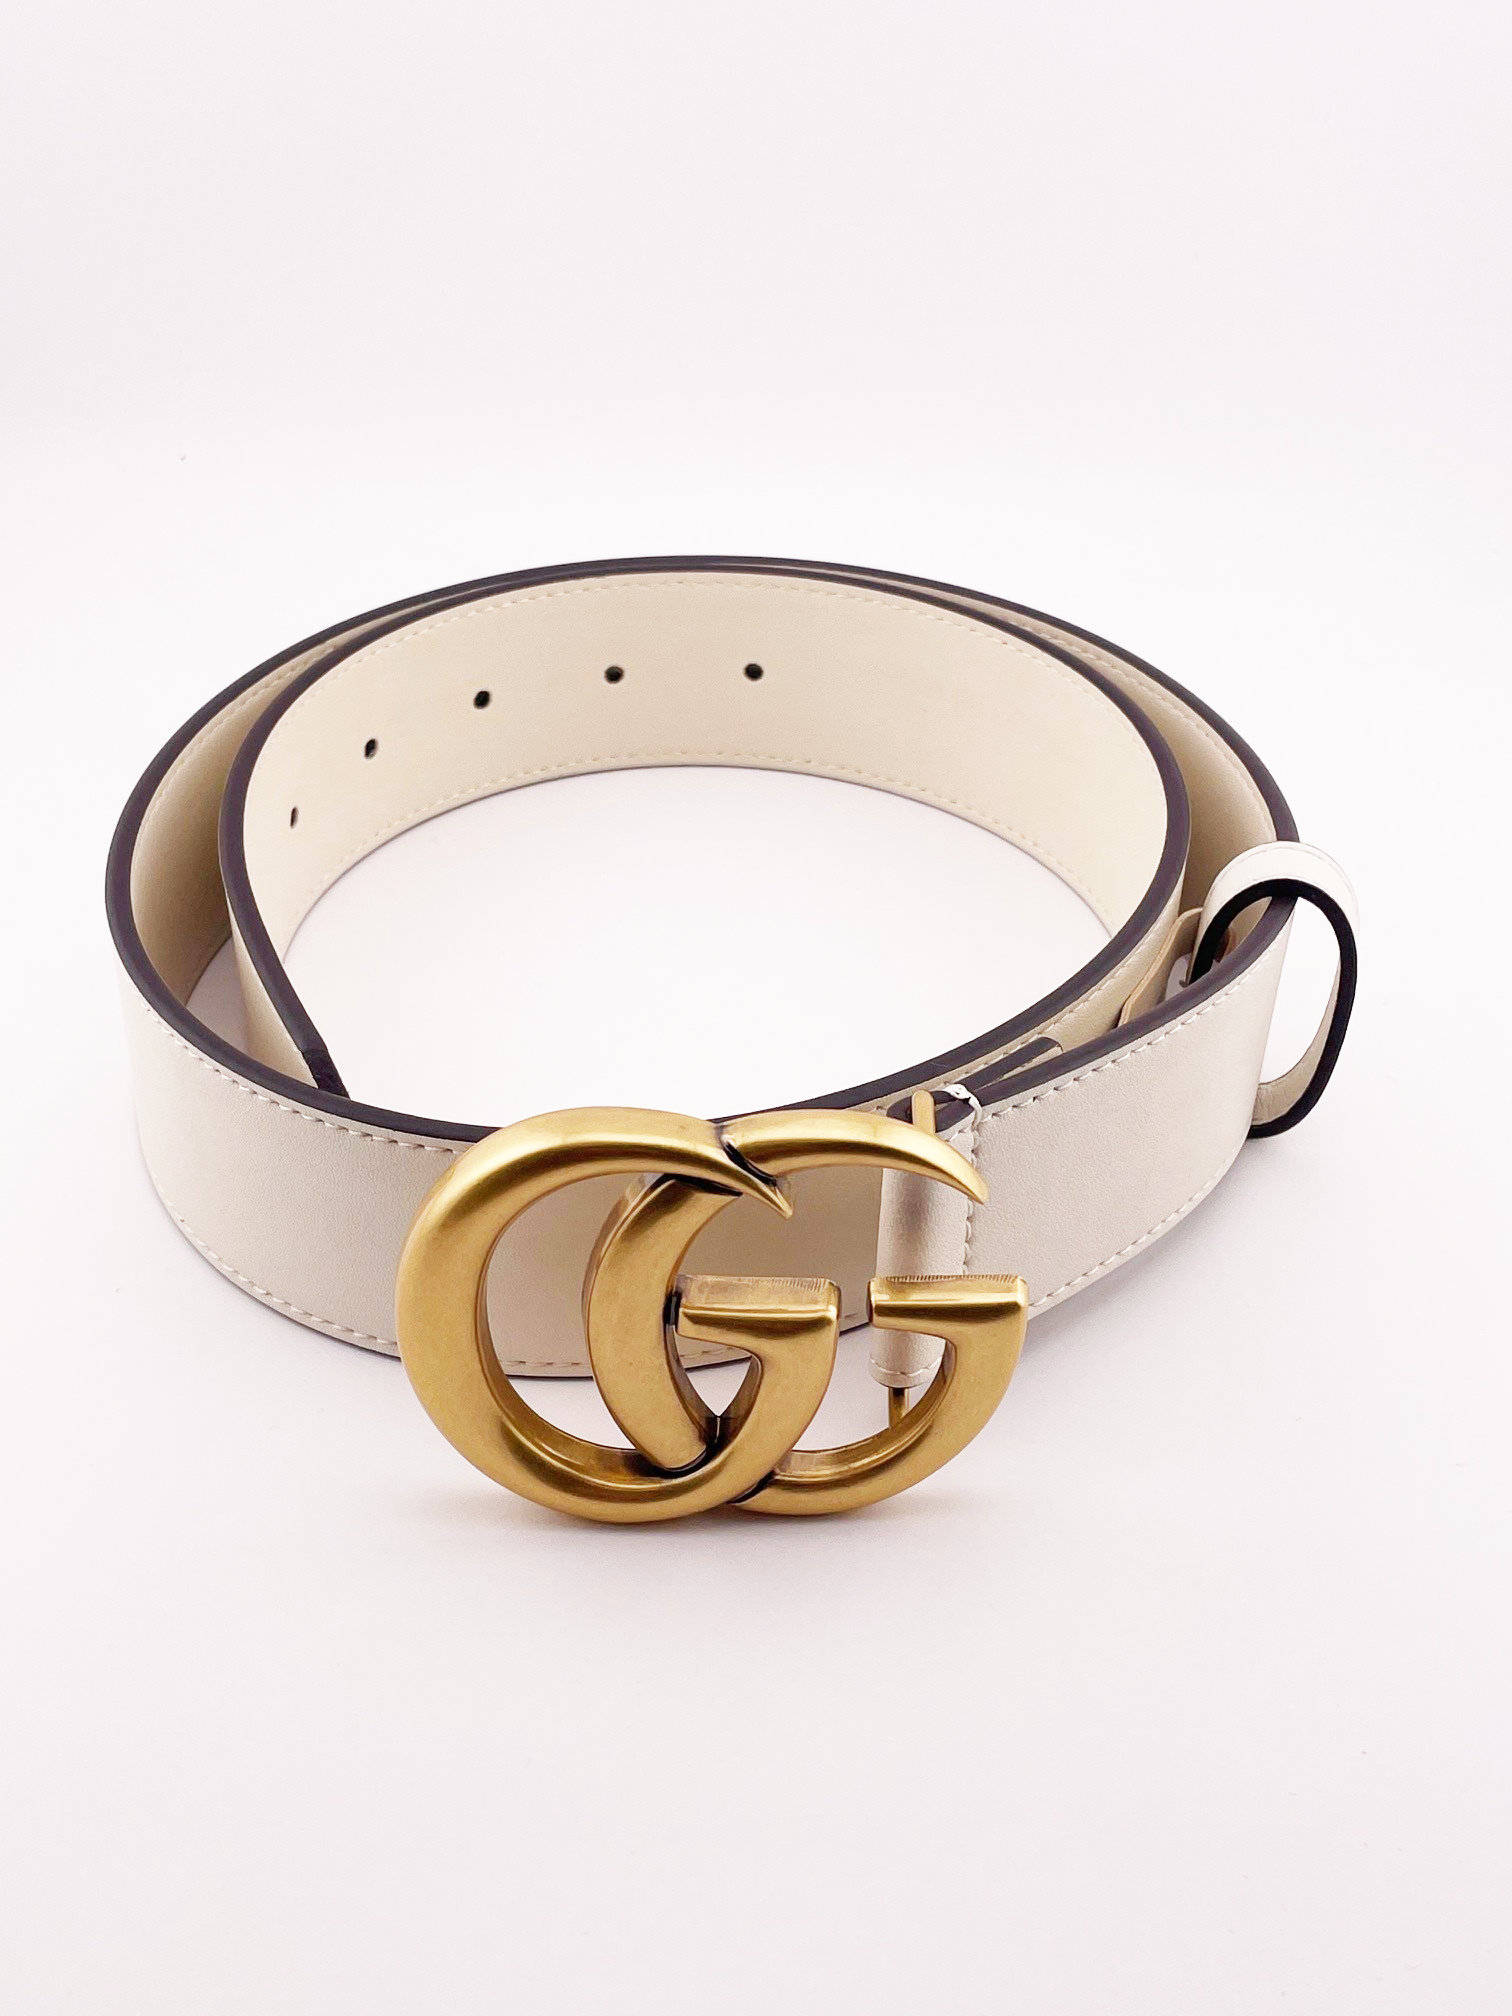 Gucci Thin Belt Double G Buckle .8 Width Pastel Blue in Calfskin Leather  with Palladium-tone - US